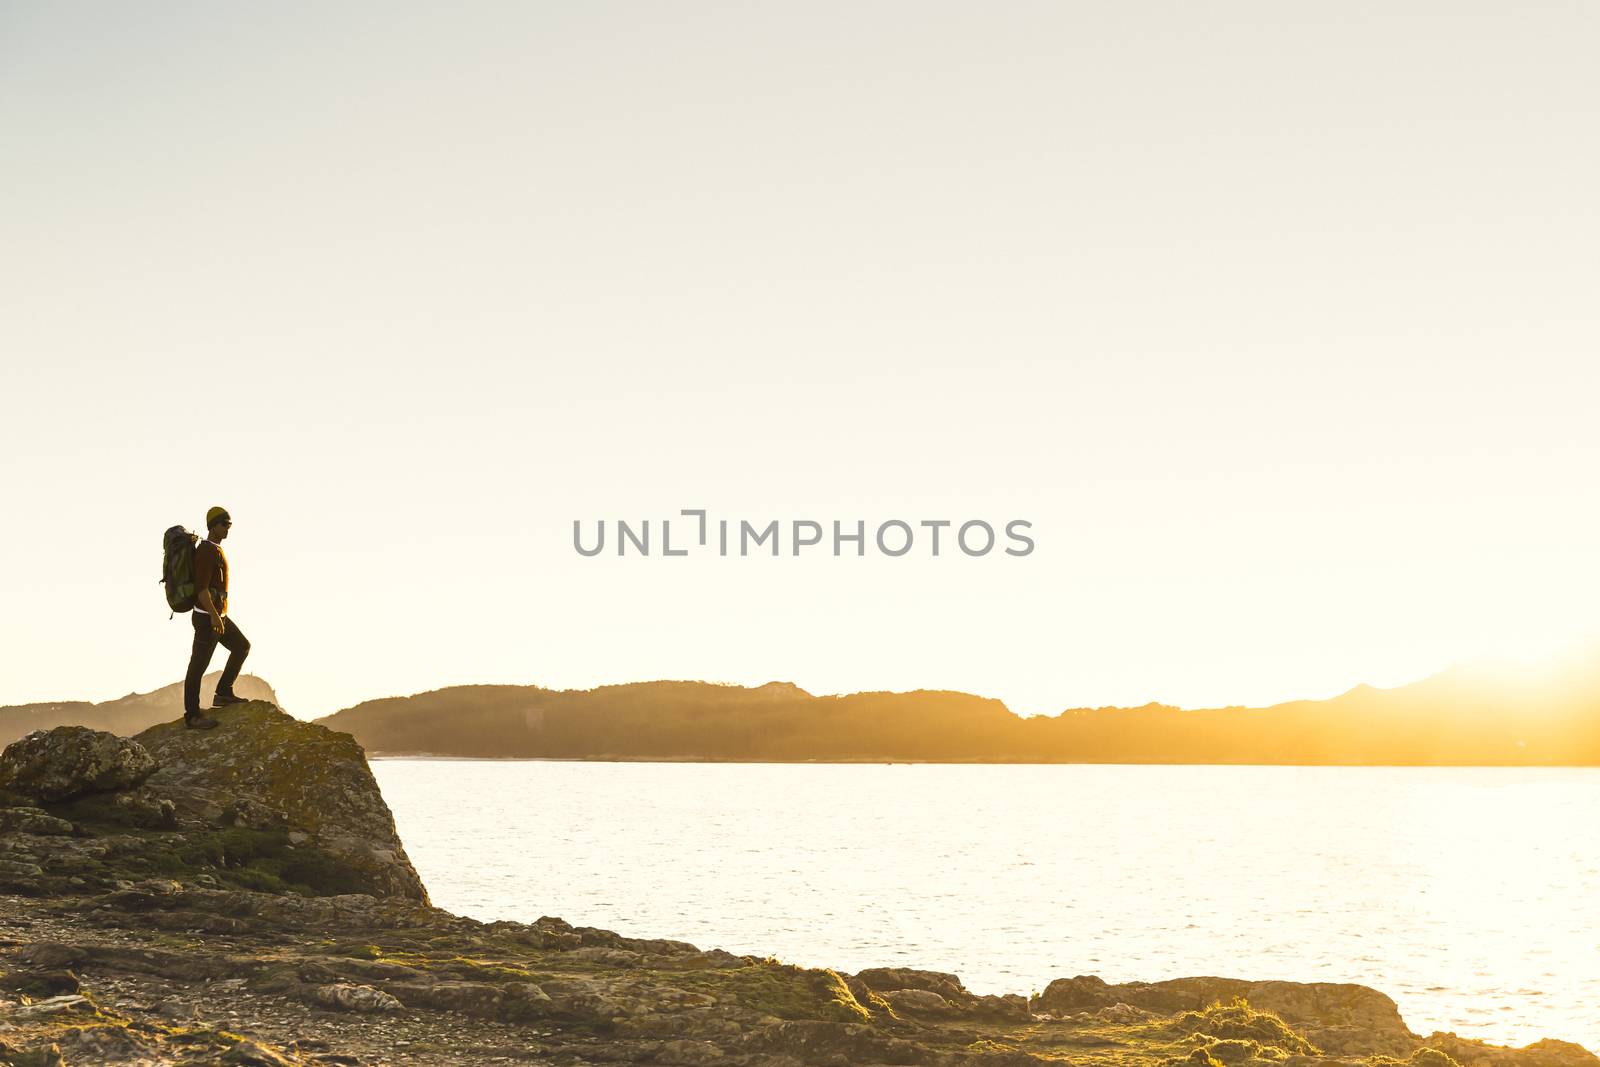 Shot of a man enjoying the view of the coast at sunset